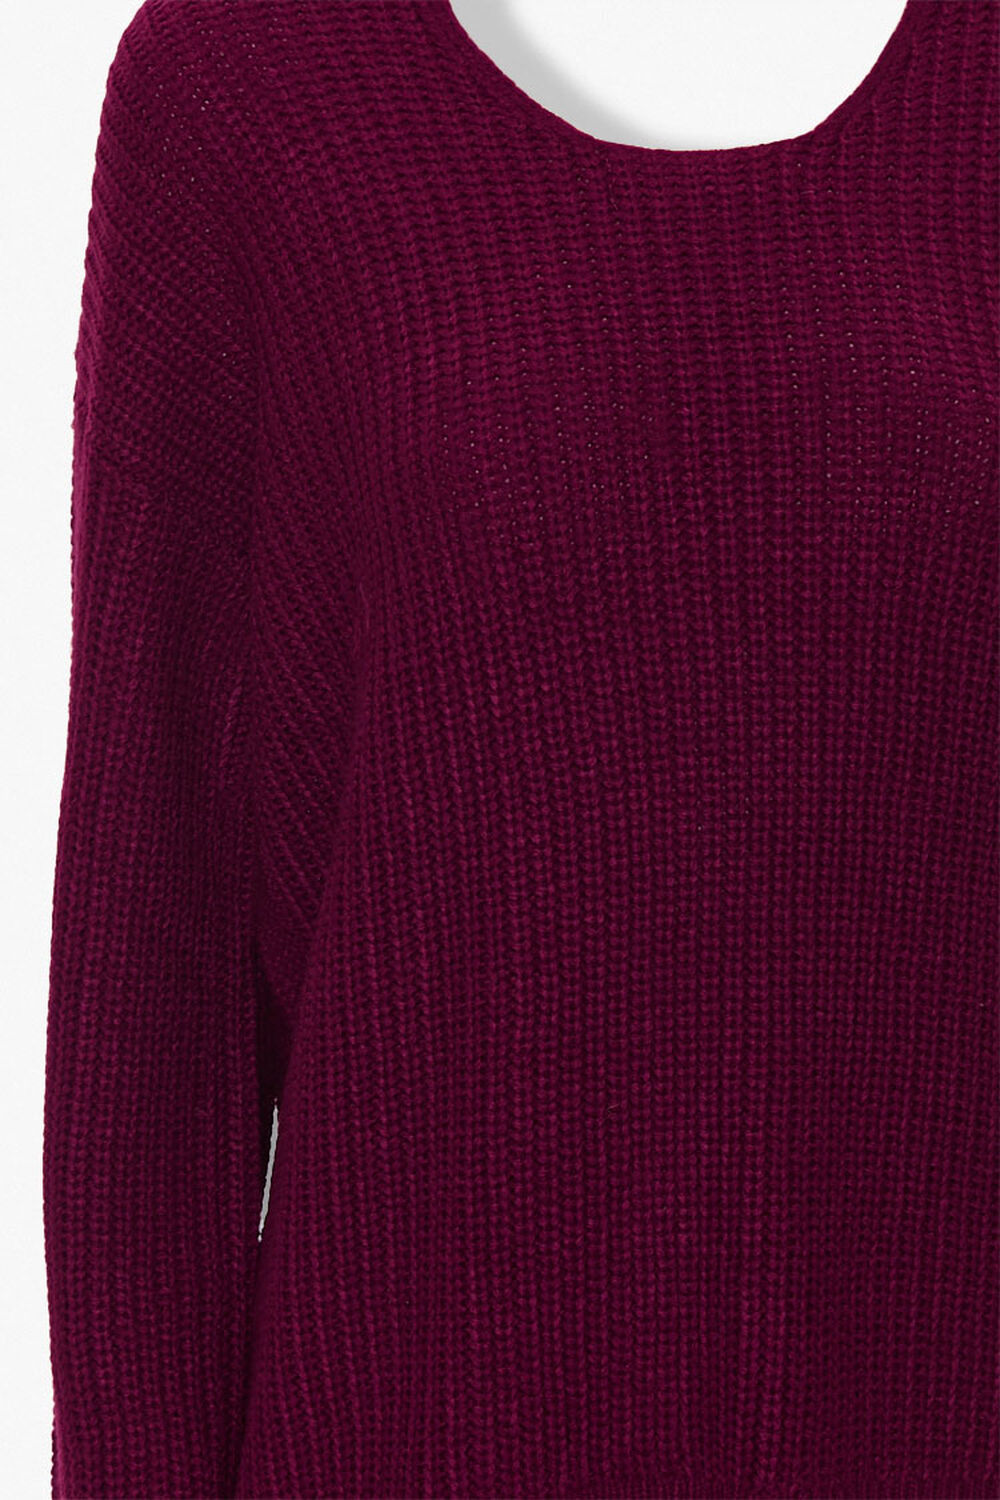 Cable-Knit Cutout Sweater, image 3